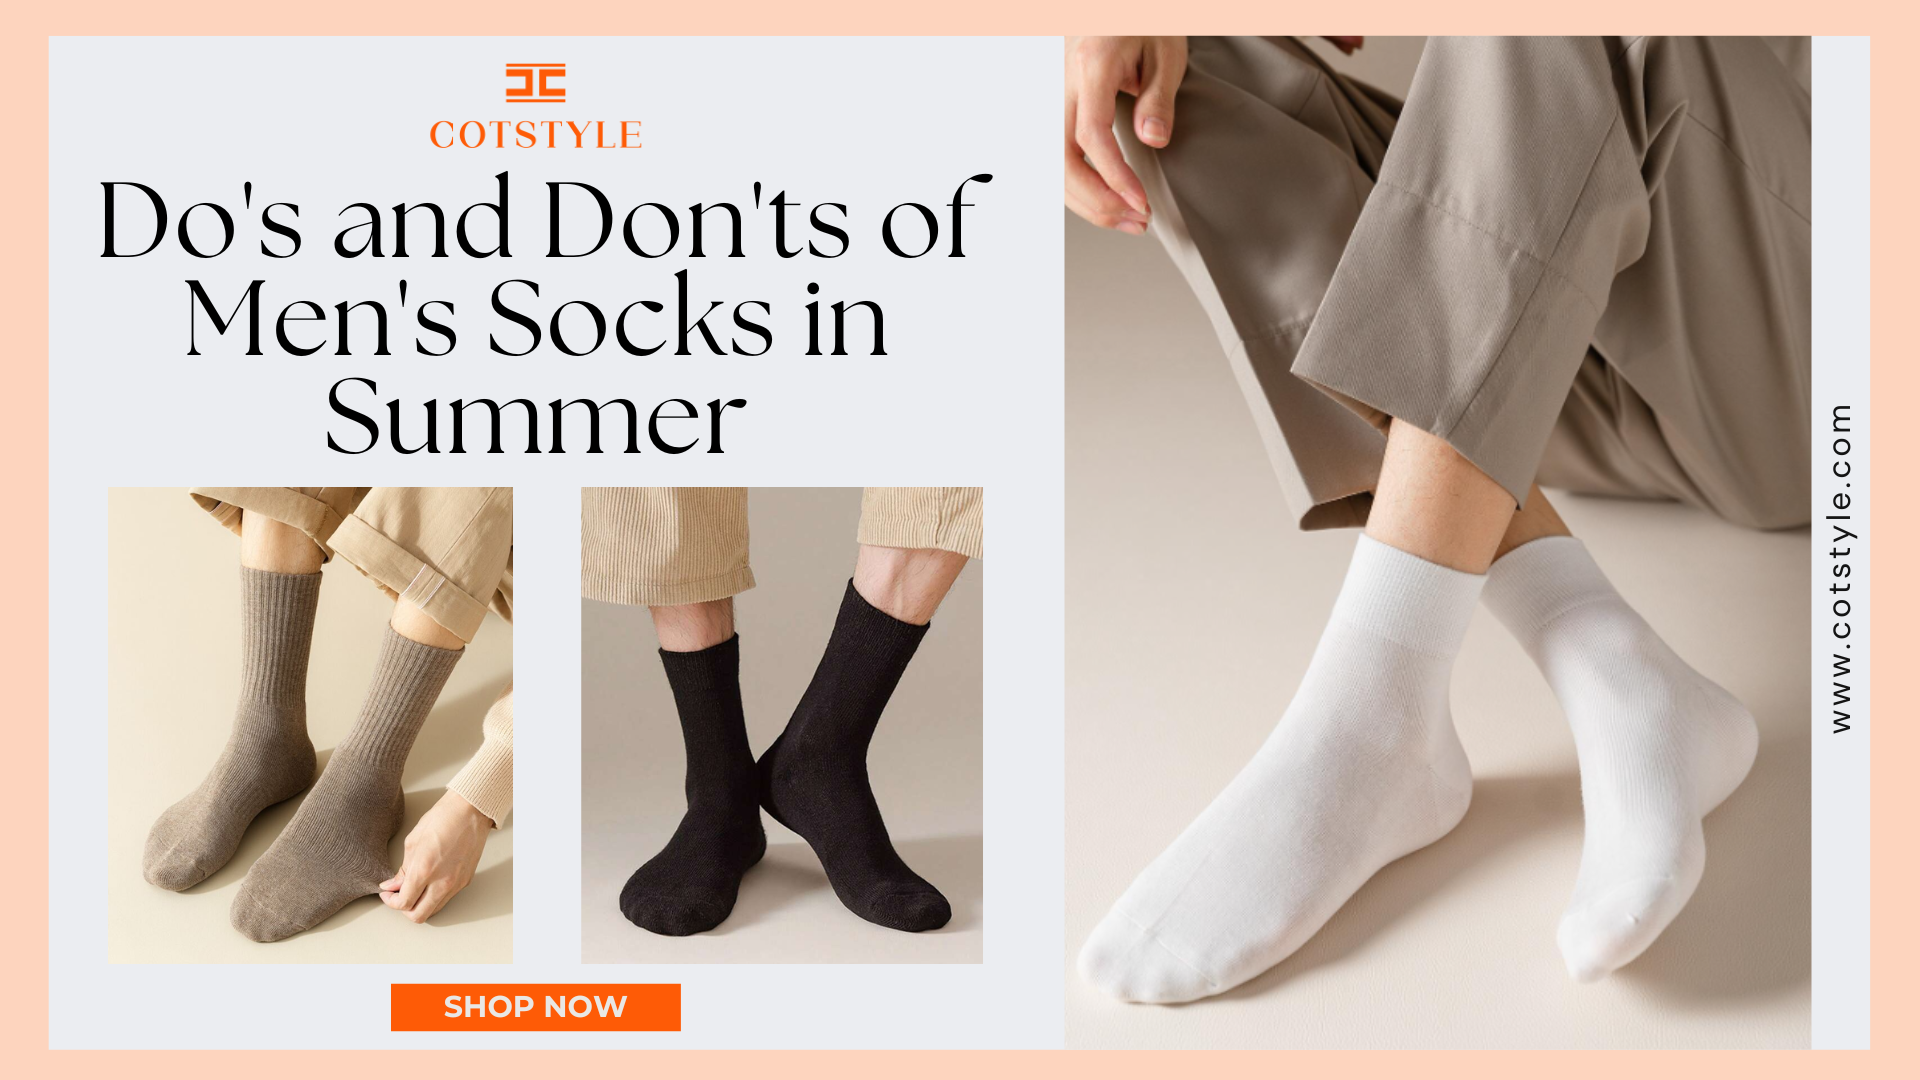 Do's and Don'ts of Men's Socks in Summer